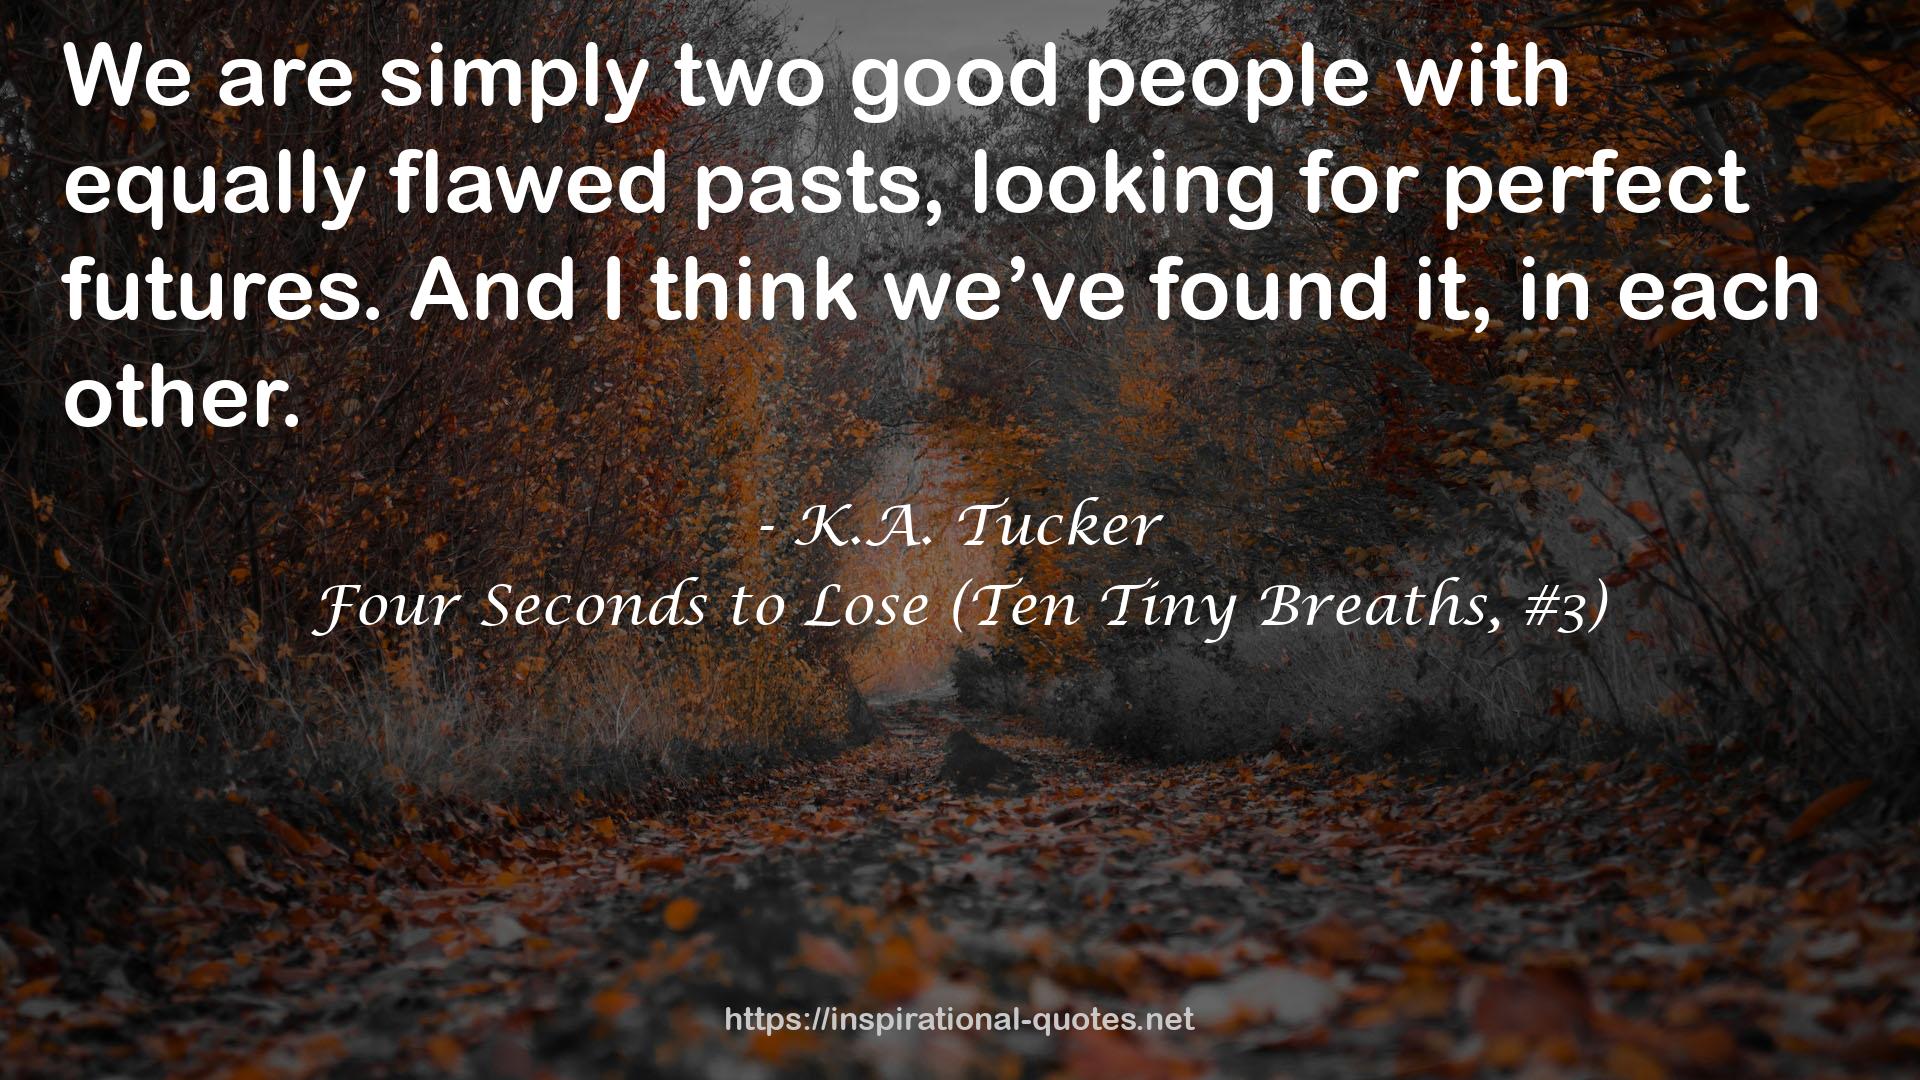 Four Seconds to Lose (Ten Tiny Breaths, #3) QUOTES